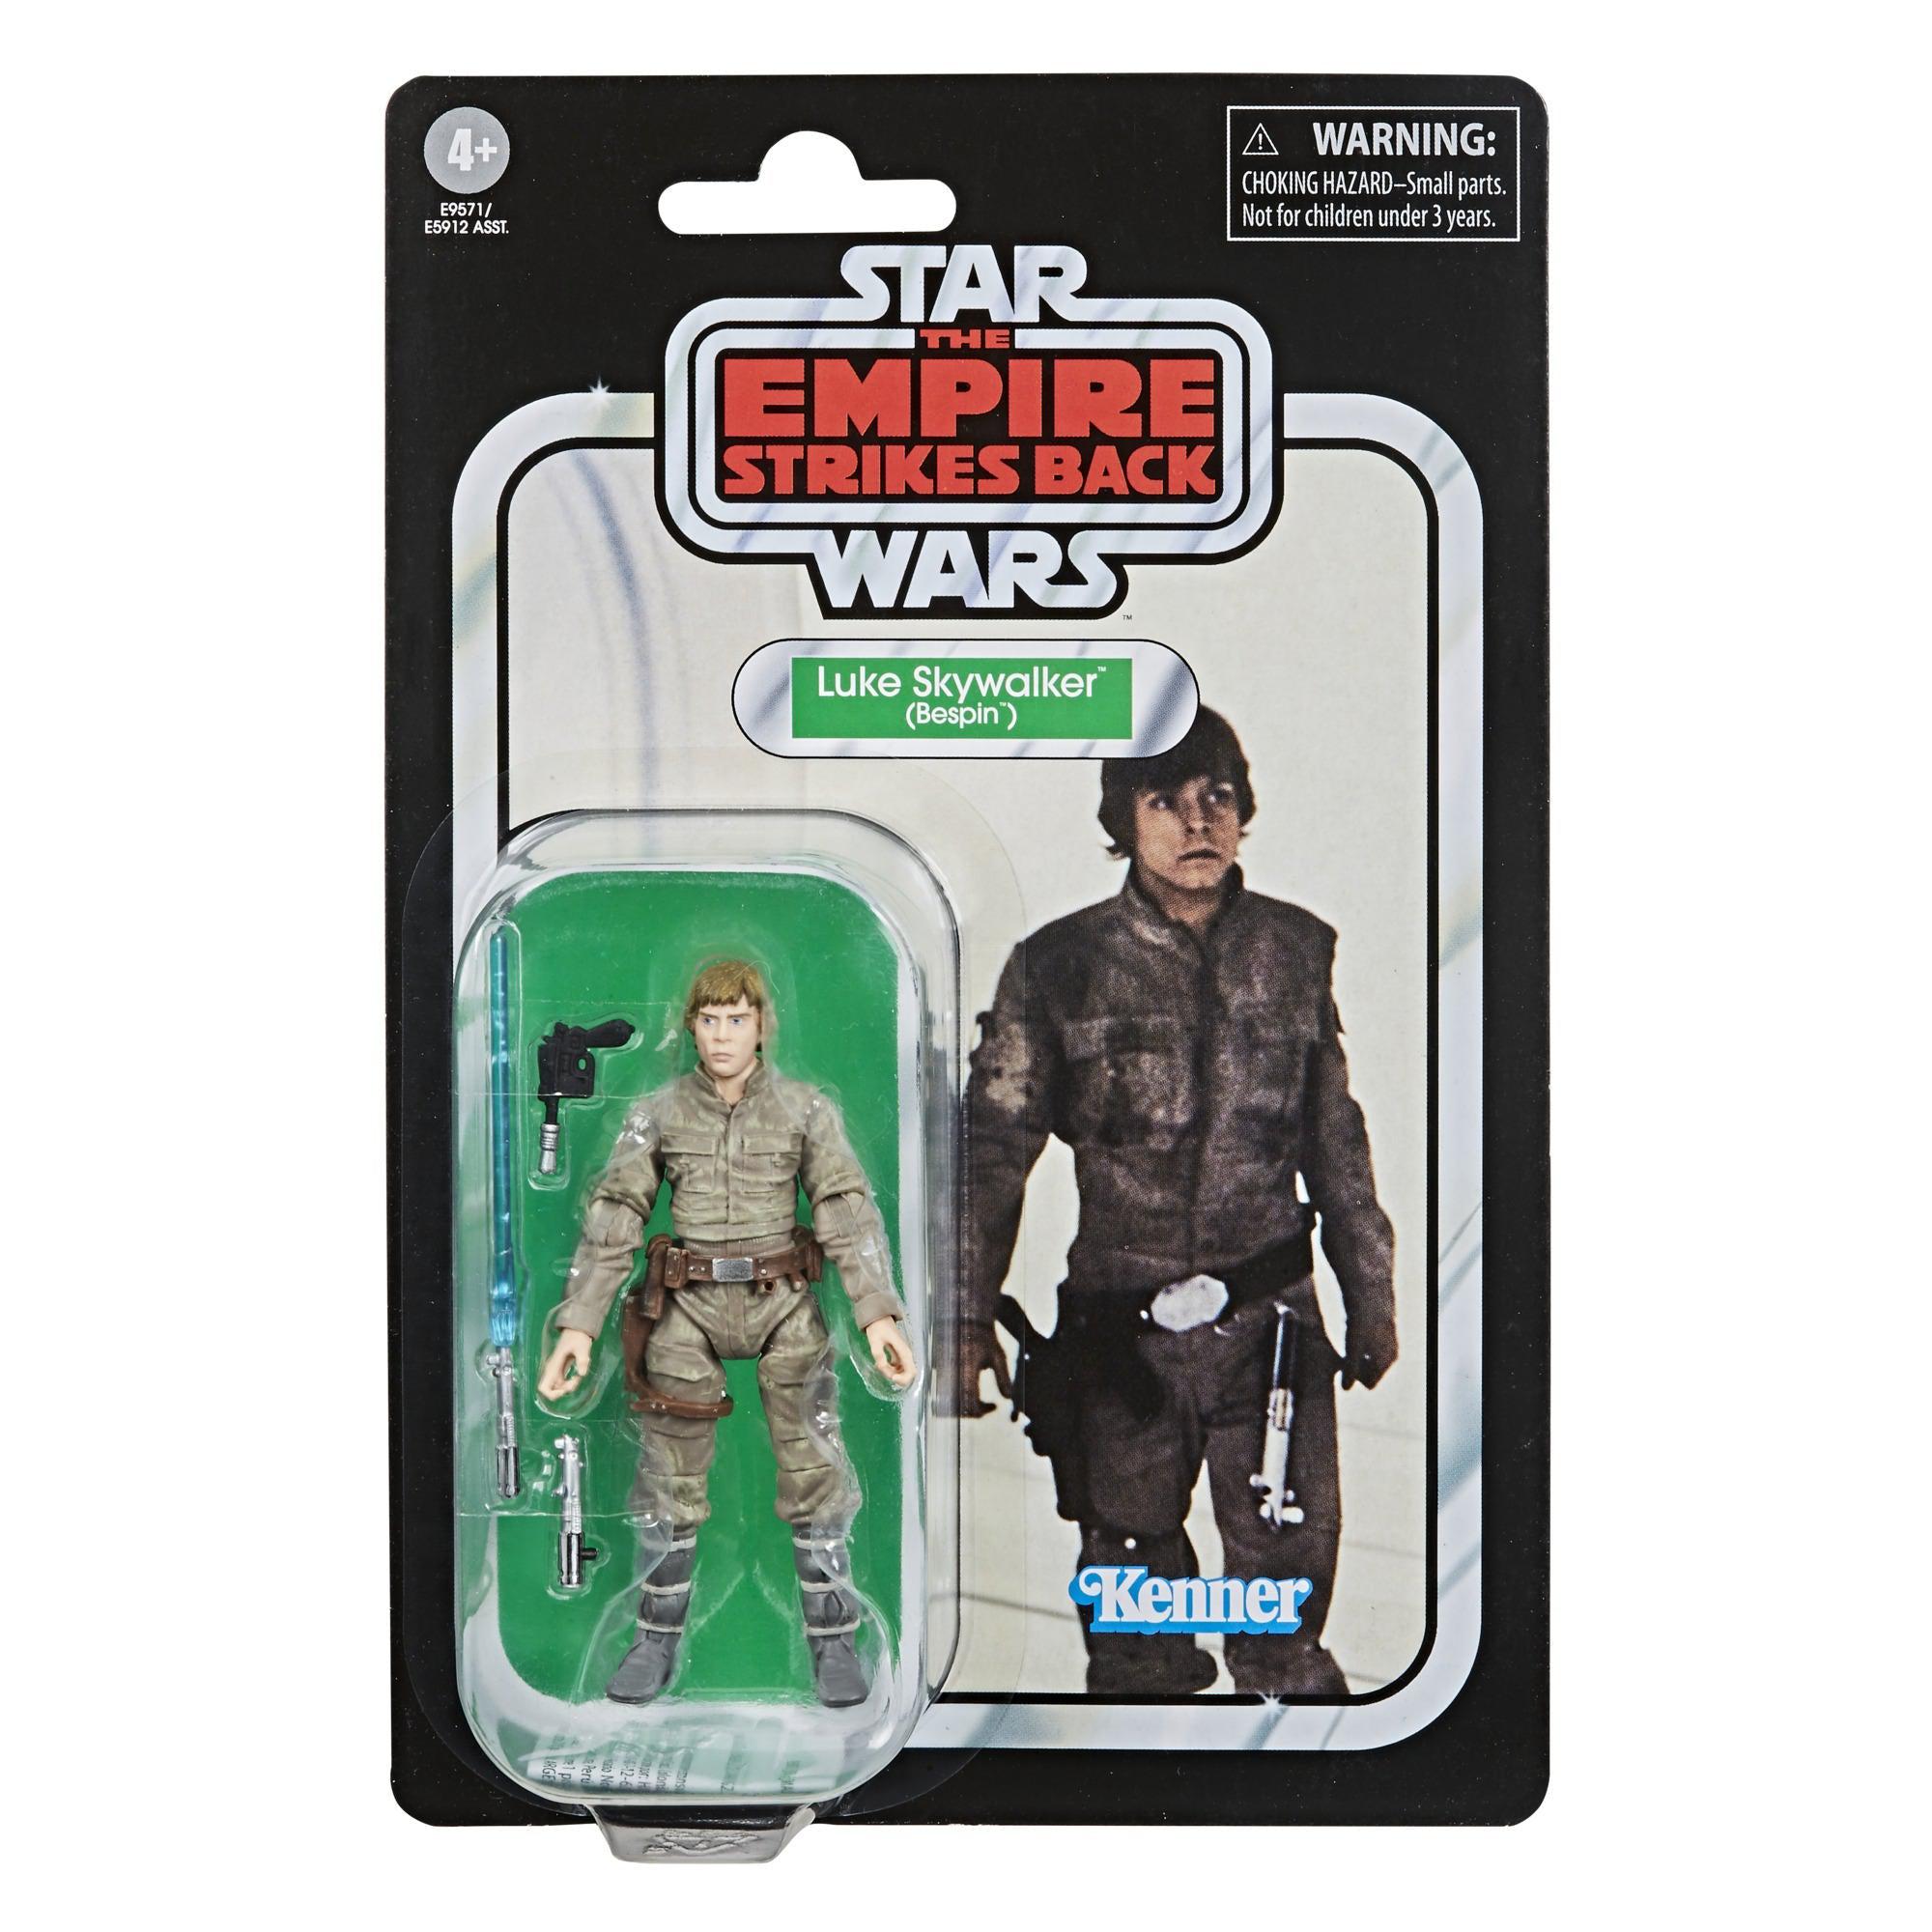 Hasbro-Star Wars: The Vintage Collection-E9571-Luke Skywalker (Bespin)-Legacy Toys